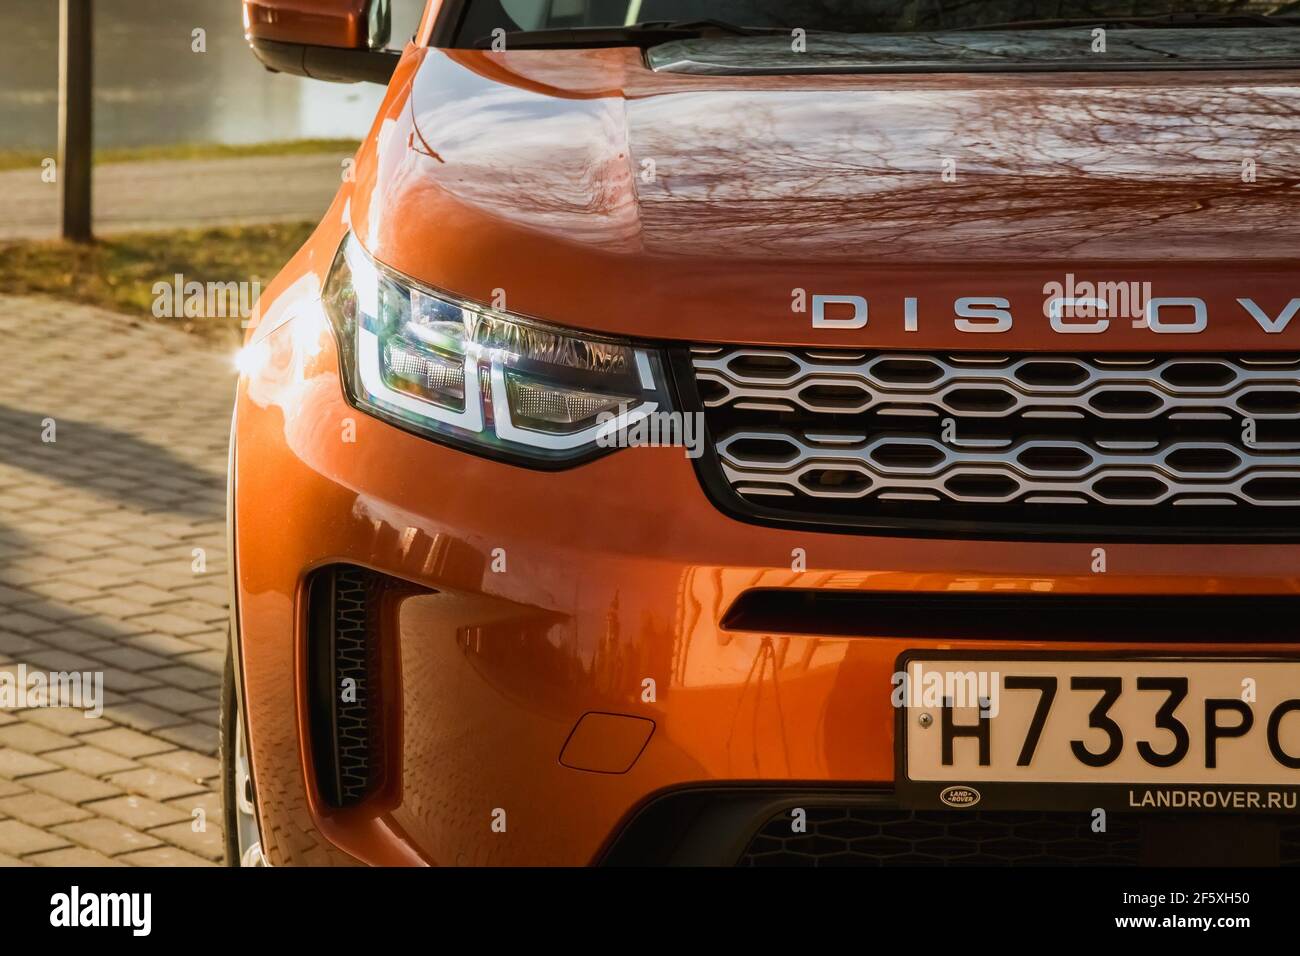 Moscow, Russia - December 20, 2019: All new Land Rover Discovery Sport 2019 is parked on the park. Close up front view. Headlights, bumper and hood of orange suv.. Stock Photo